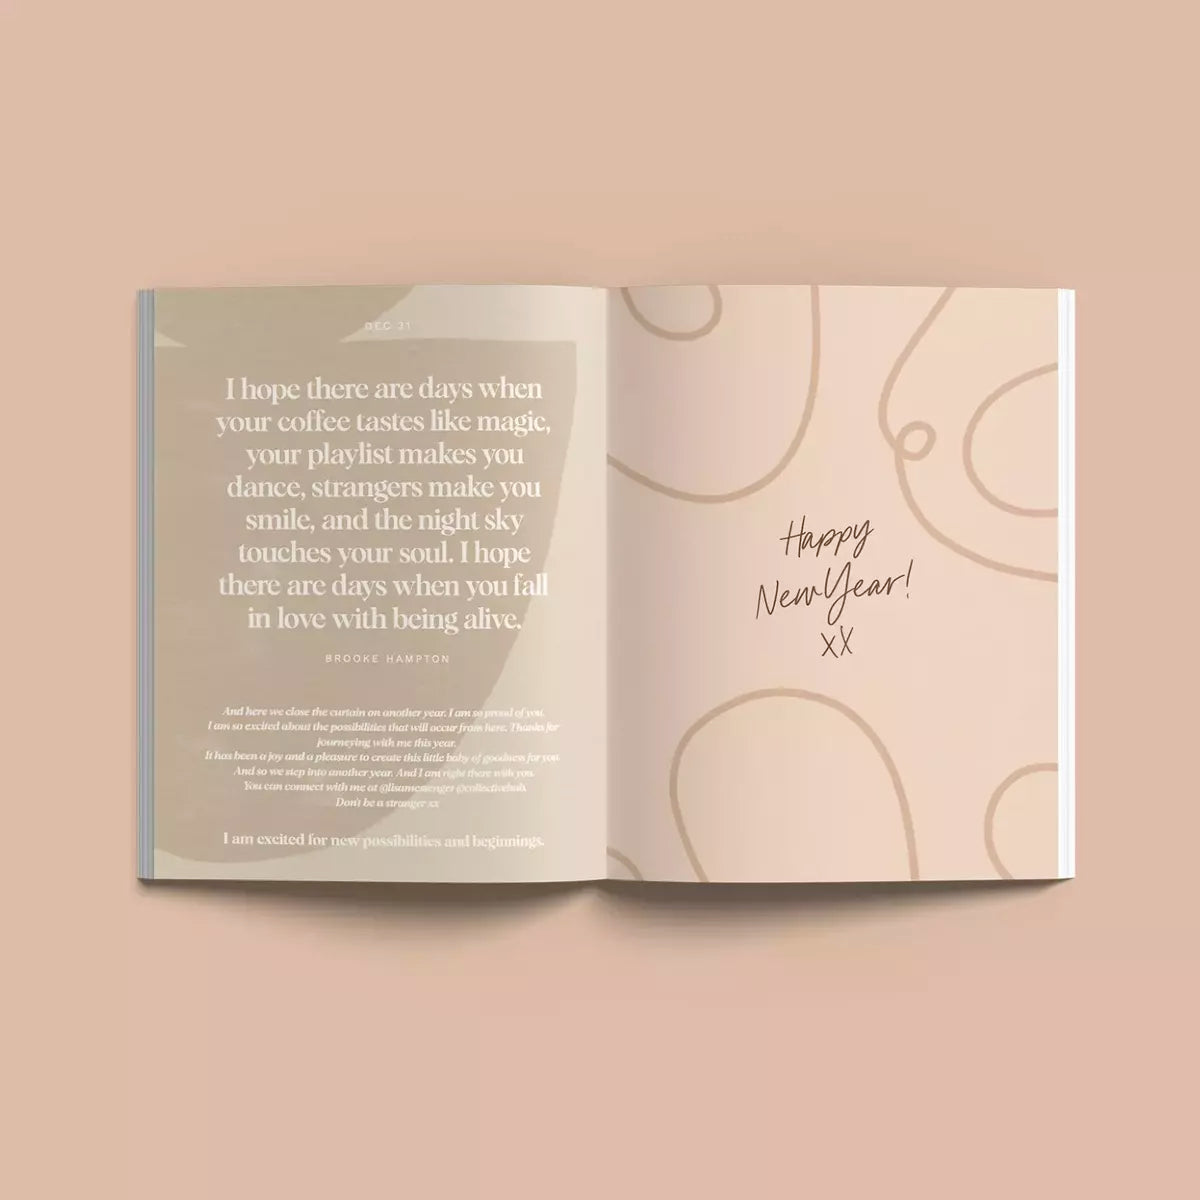 An open Daily Mantras to Ignite Your Purpose Second Edition book adorned with a heartwarming mother's day message, serving as a source of daily inspiration and purpose, by Collective Hub.